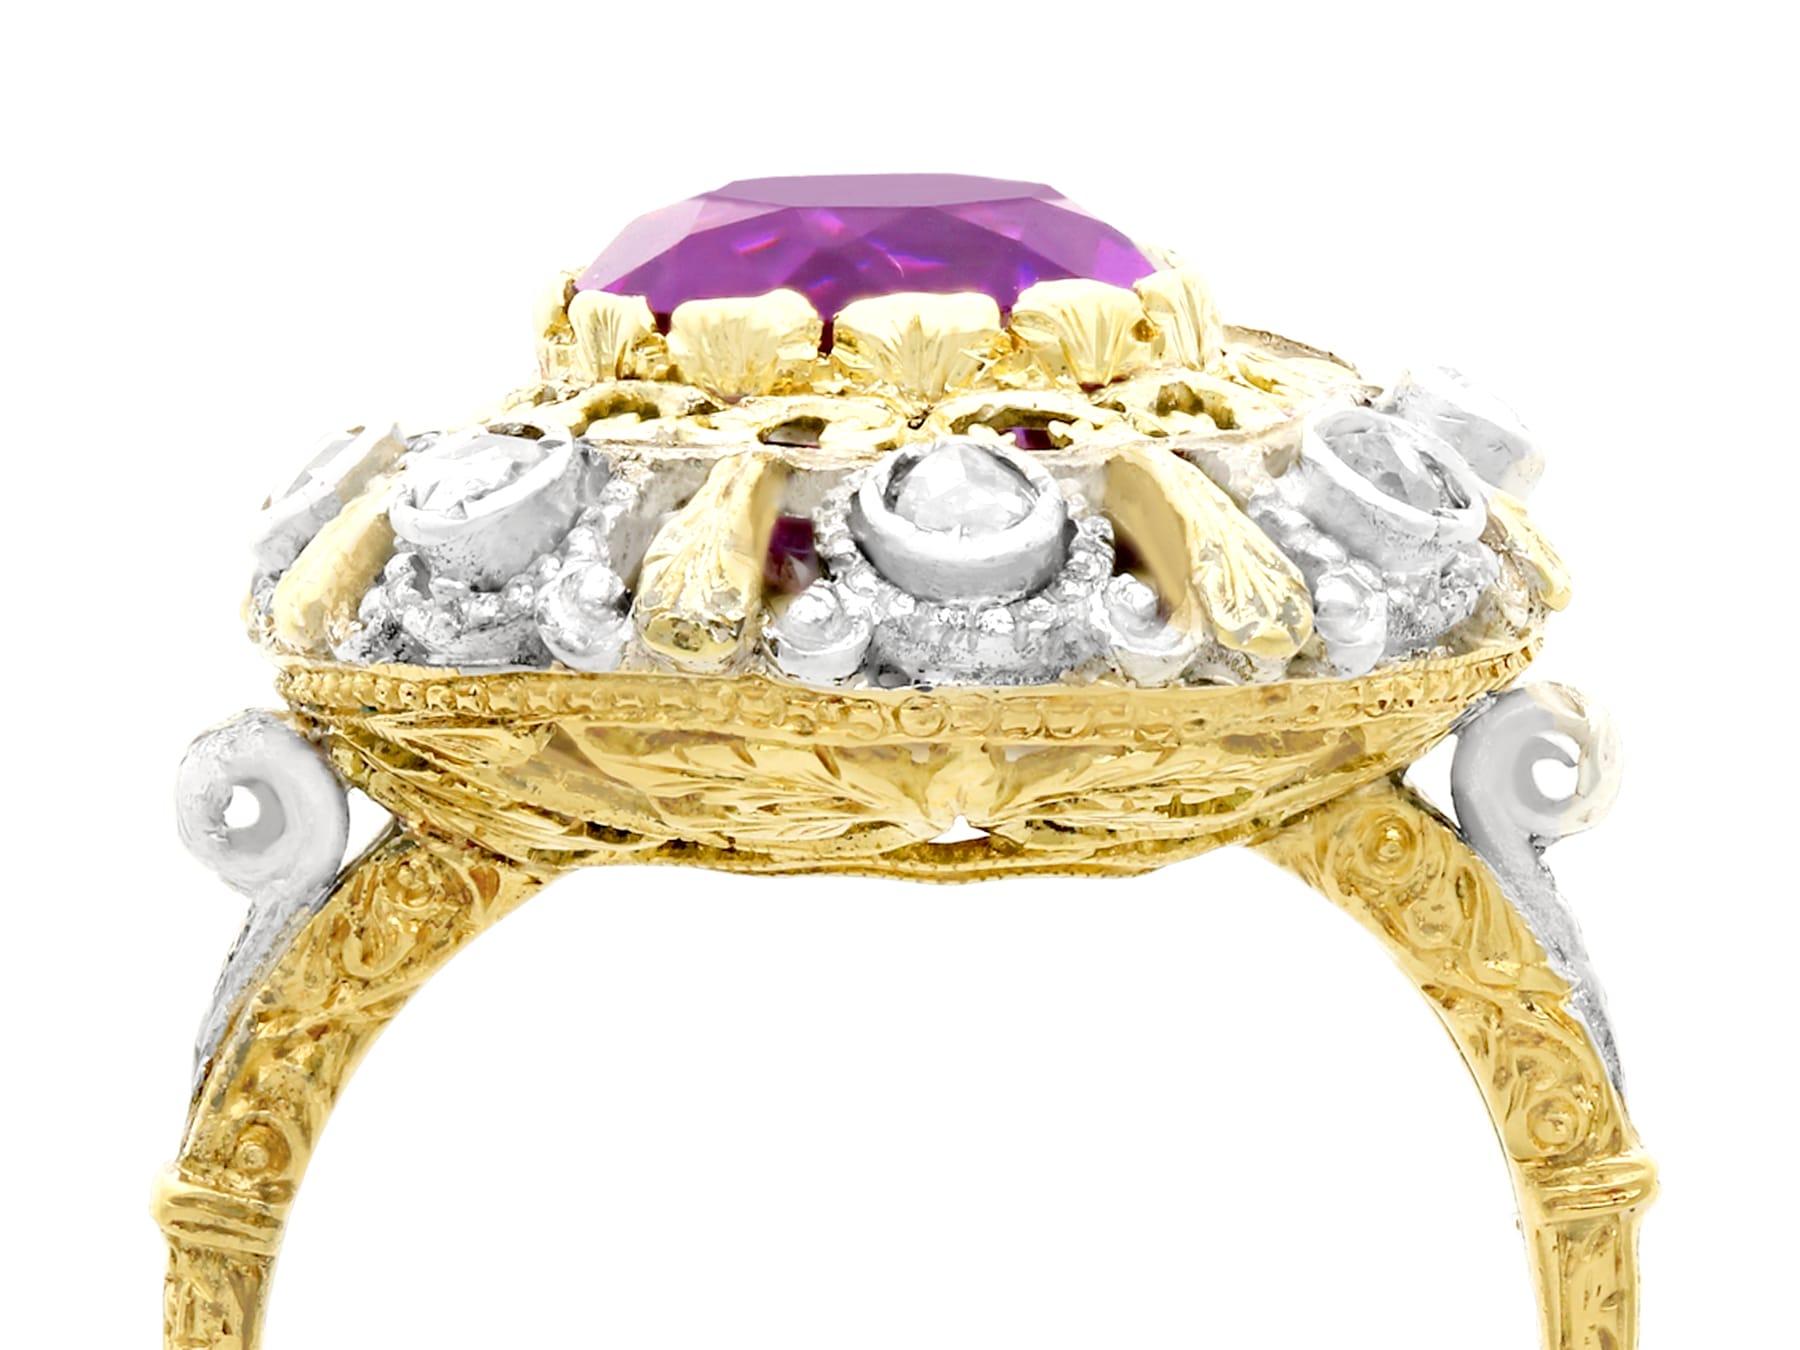 A stunning antique 5.92 carat amethyst and 0.32 carat diamond, 18 karat yellow gold and silver set dress ring; part of our diverse antique jewelry and estate jewelry collections.

This stunning, fine and impressive antique amethyst ring has been